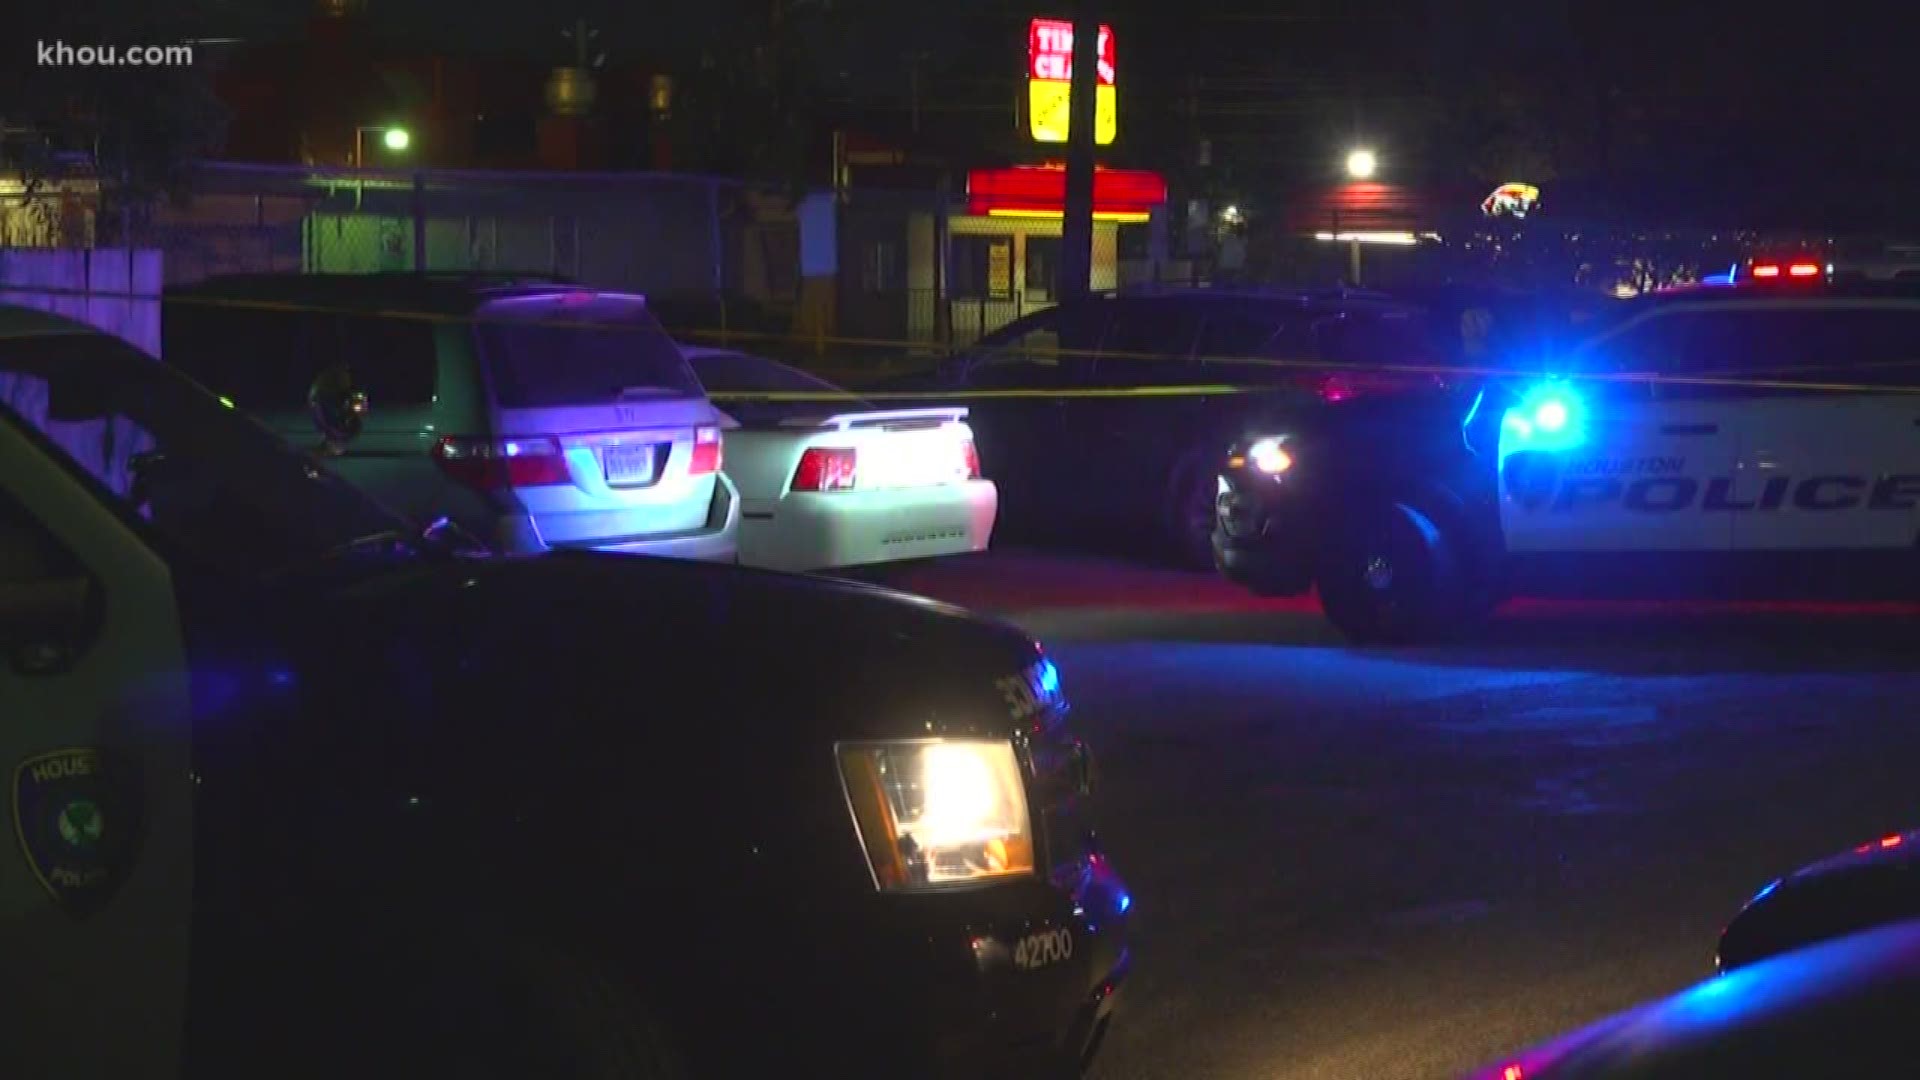 Police said three people were taken into custody late Monday after a reported shooting and carjacking in northwest Houston.